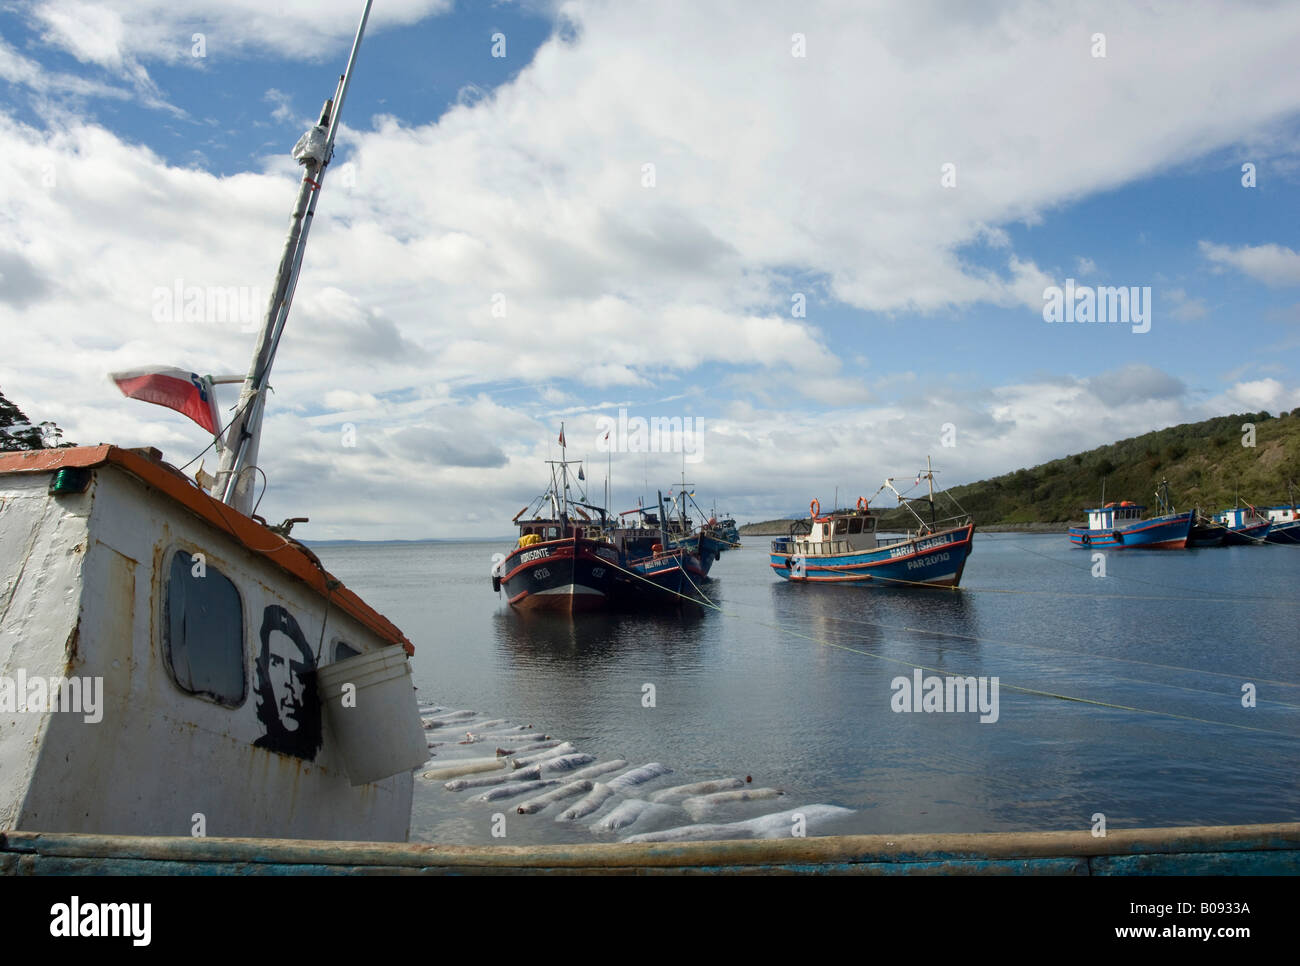 Fishing boats with likeness of Che Guevara painted on one, in the harbour of Puerto Hombre, Patagonia, Chile, South America Stock Photo